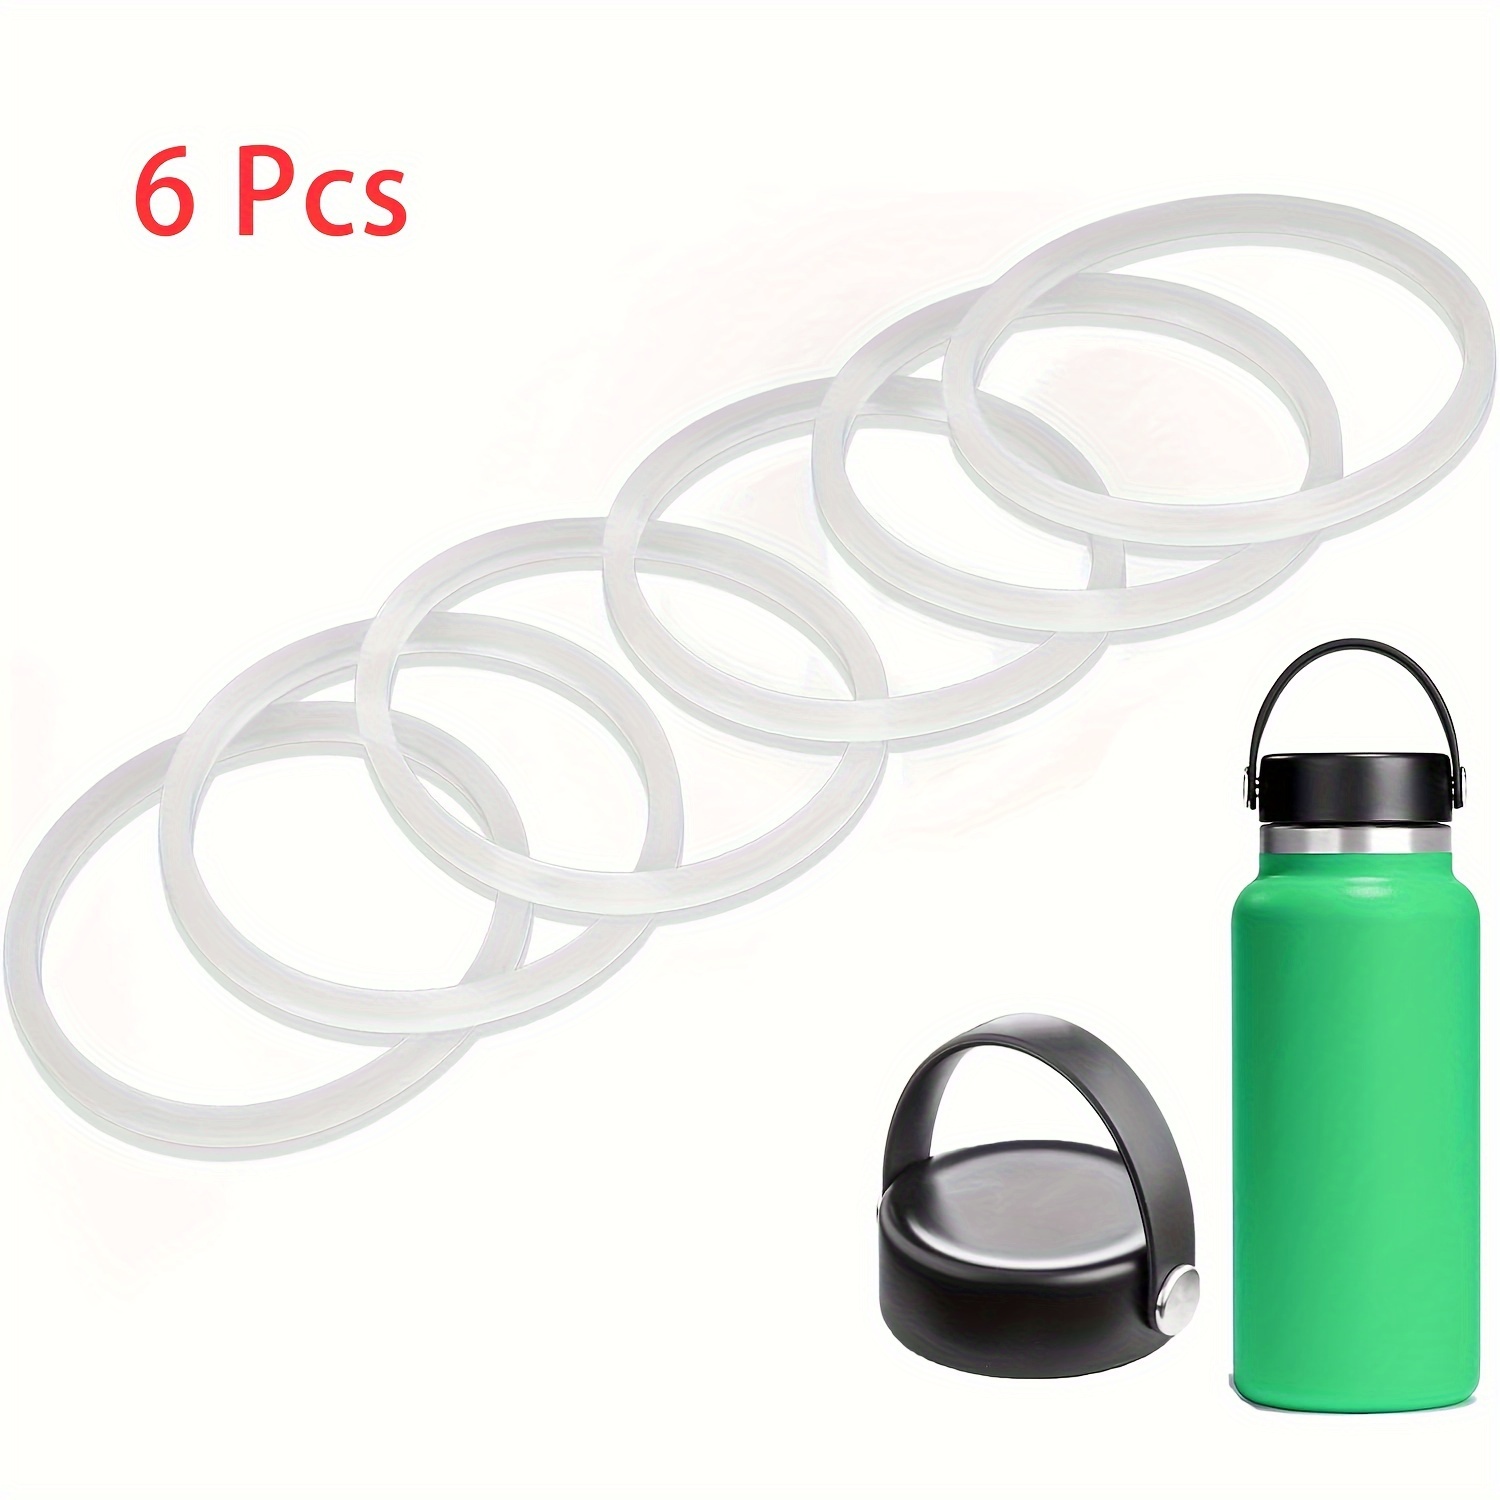 10Pcs Vacuum Bottle Mug Stopper Cup Flask Cover Safety Sealing Gaskets Ring  Lids